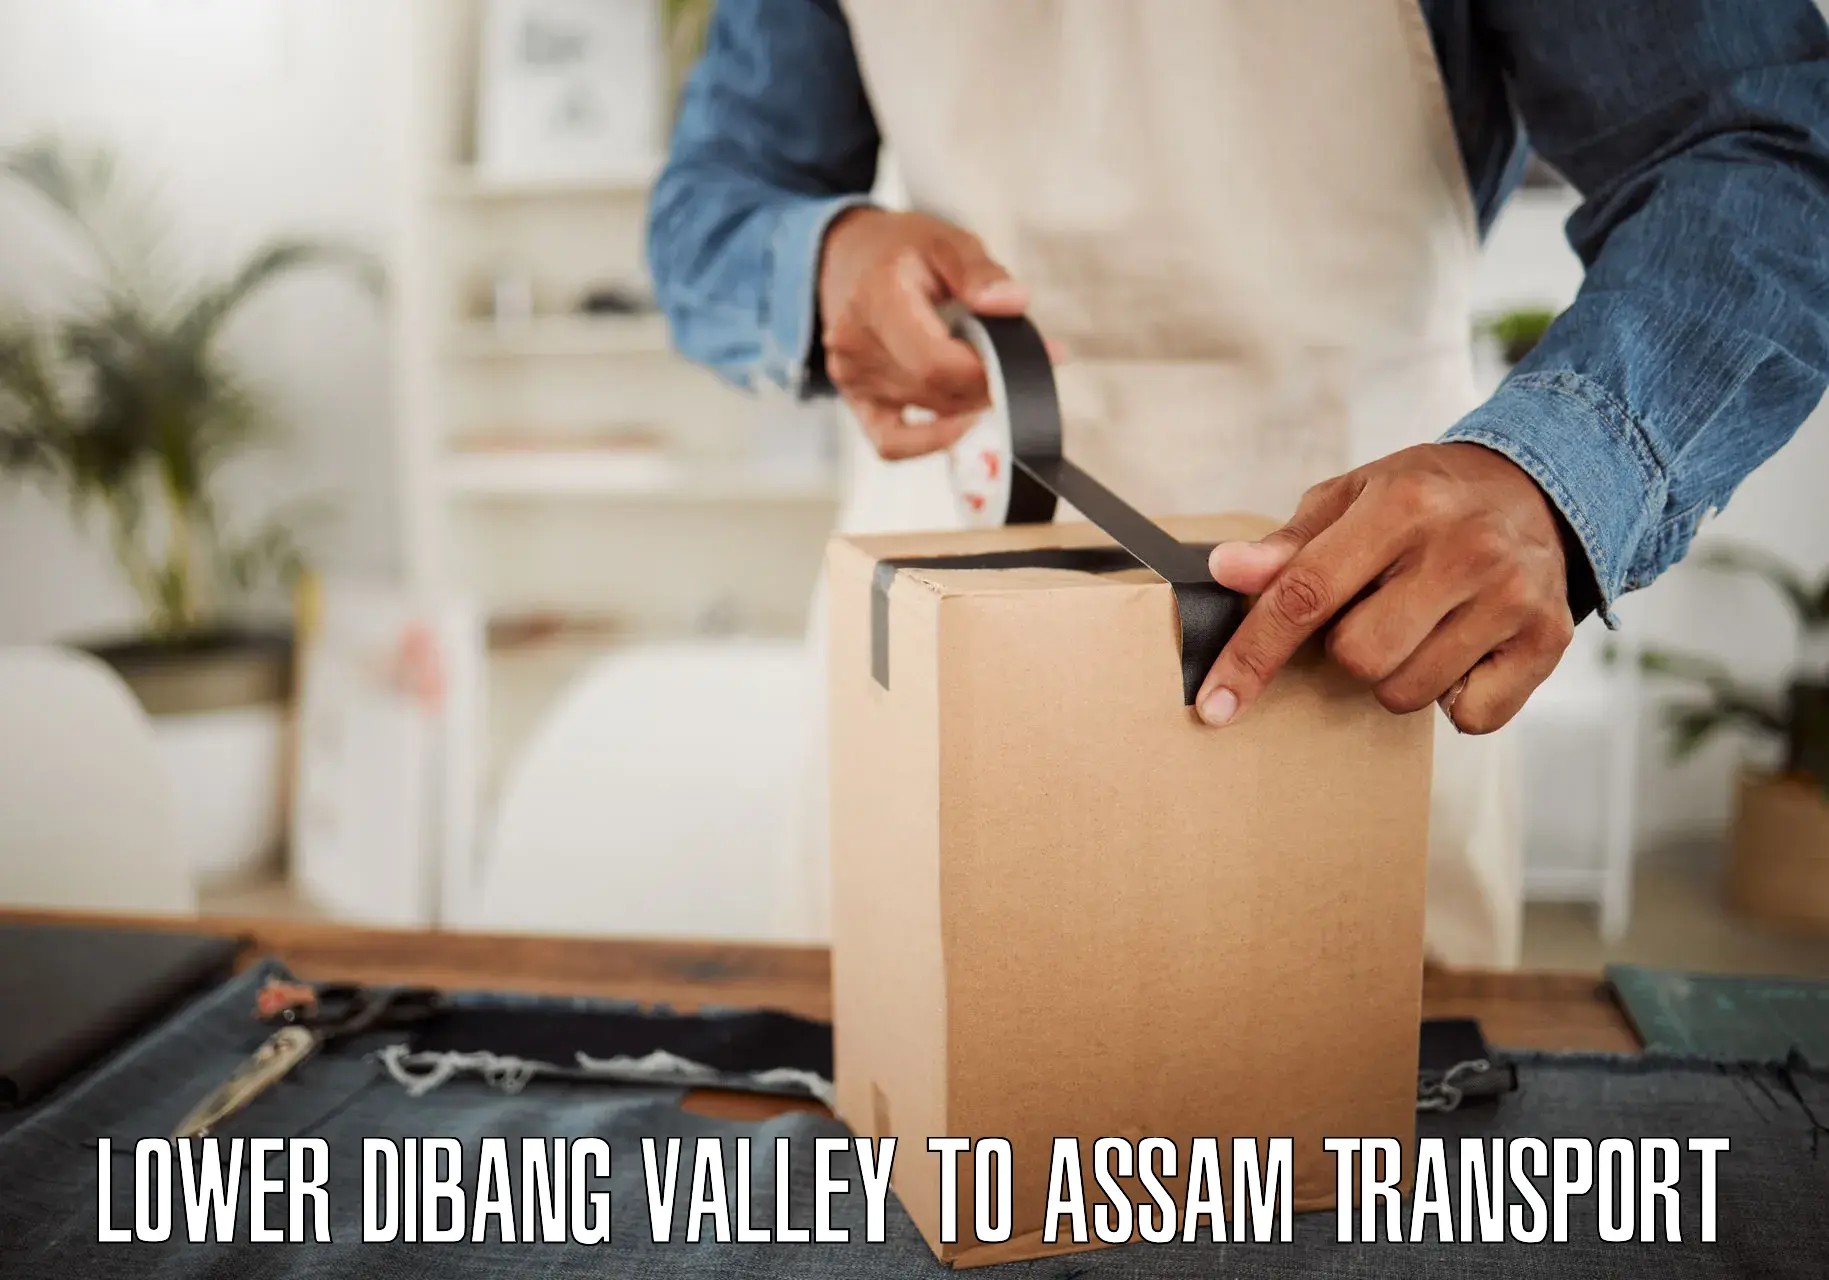 Air freight transport services in Lower Dibang Valley to Hojai